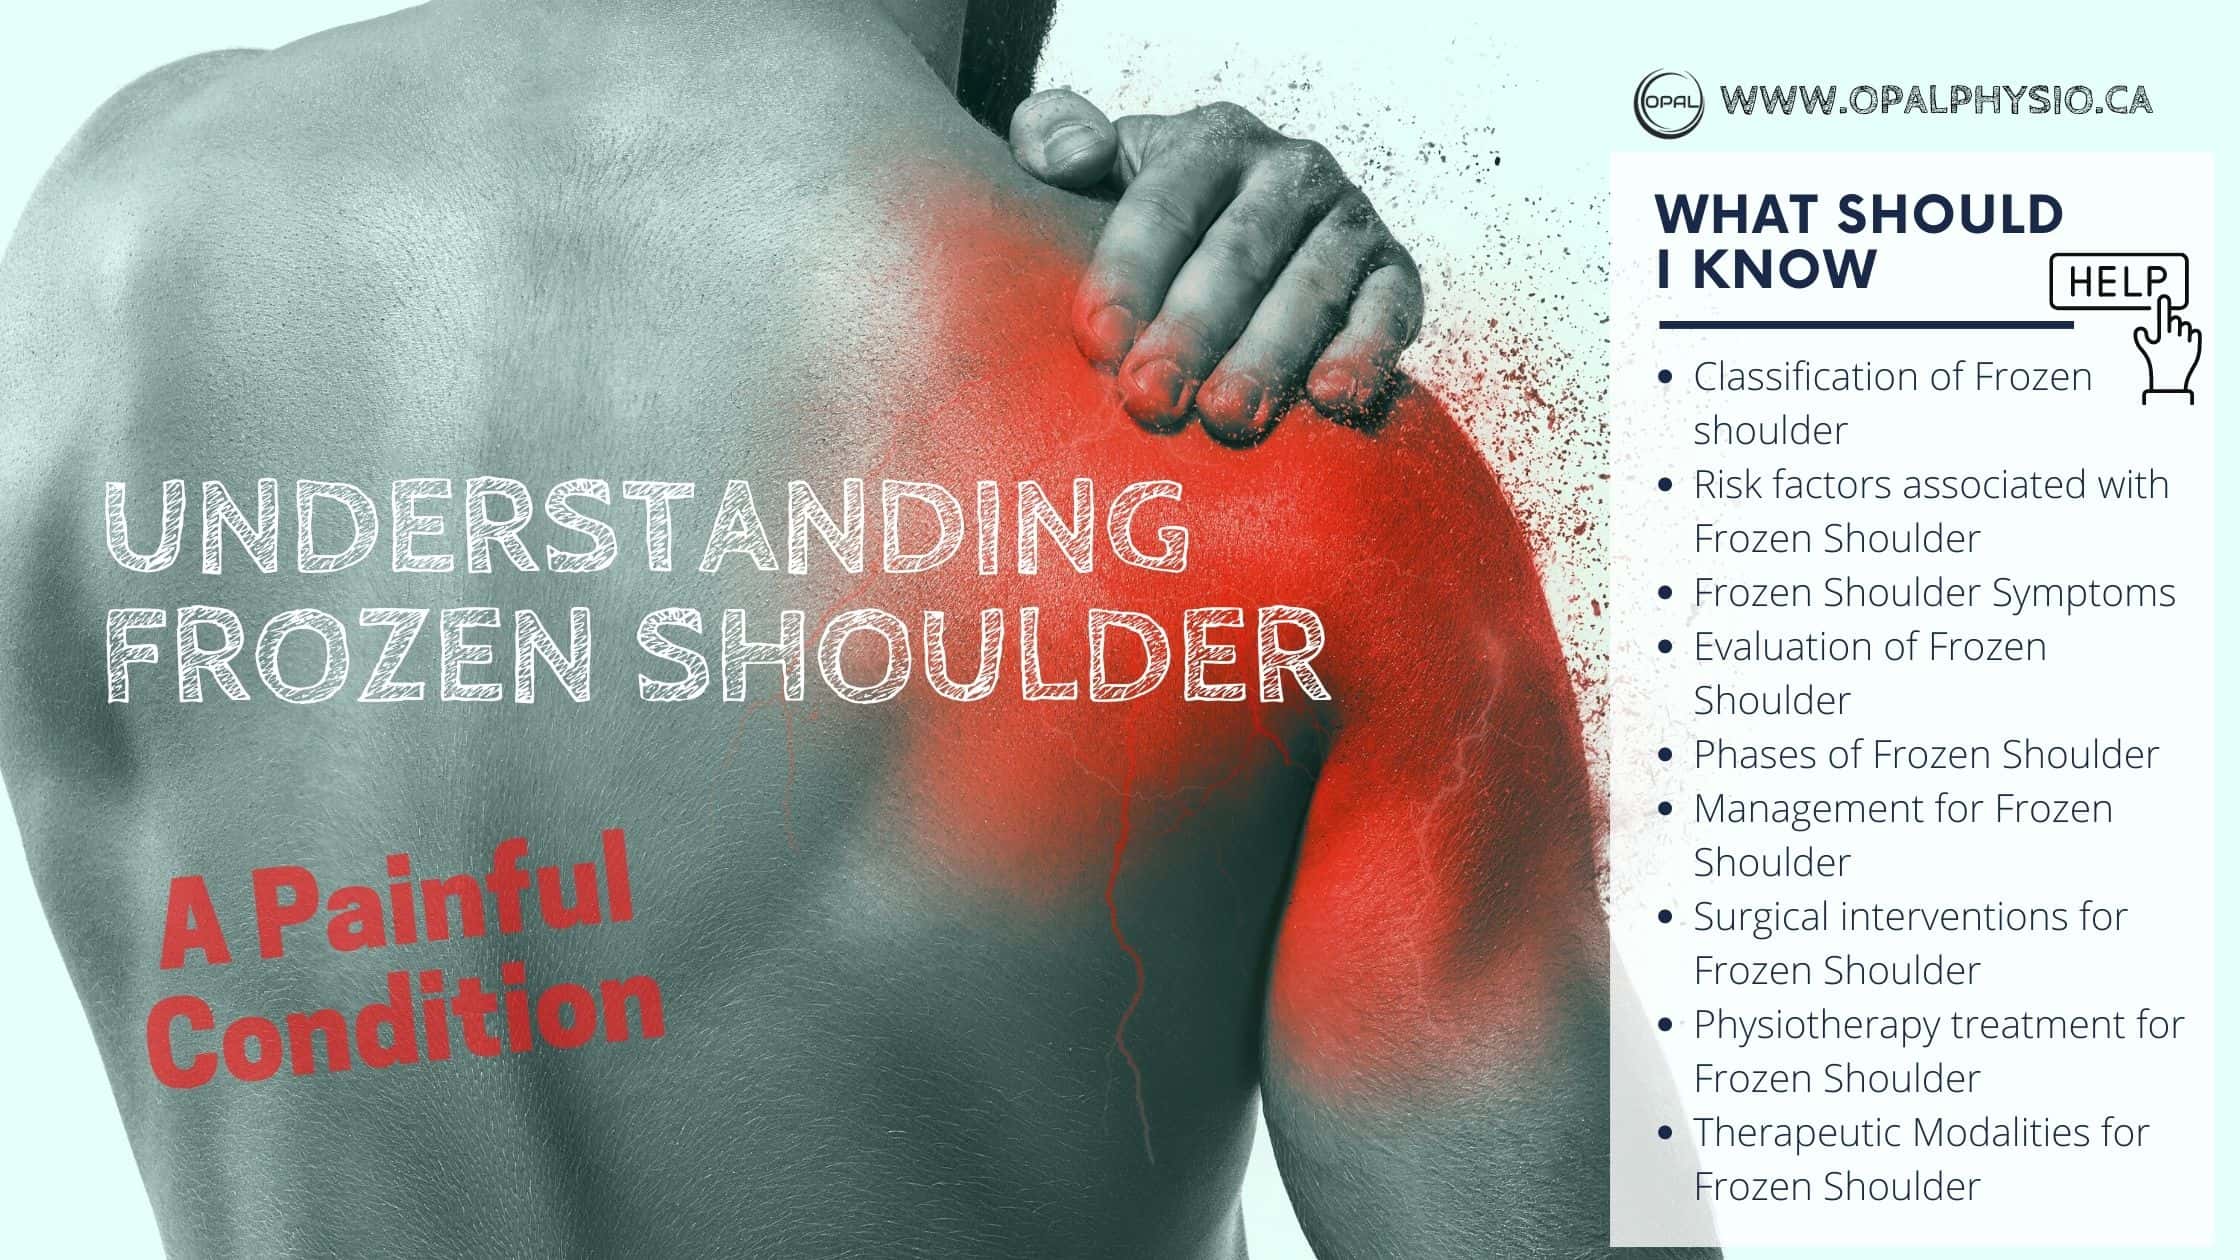 Treating A Frozen Shoulder Through Massage Therapy